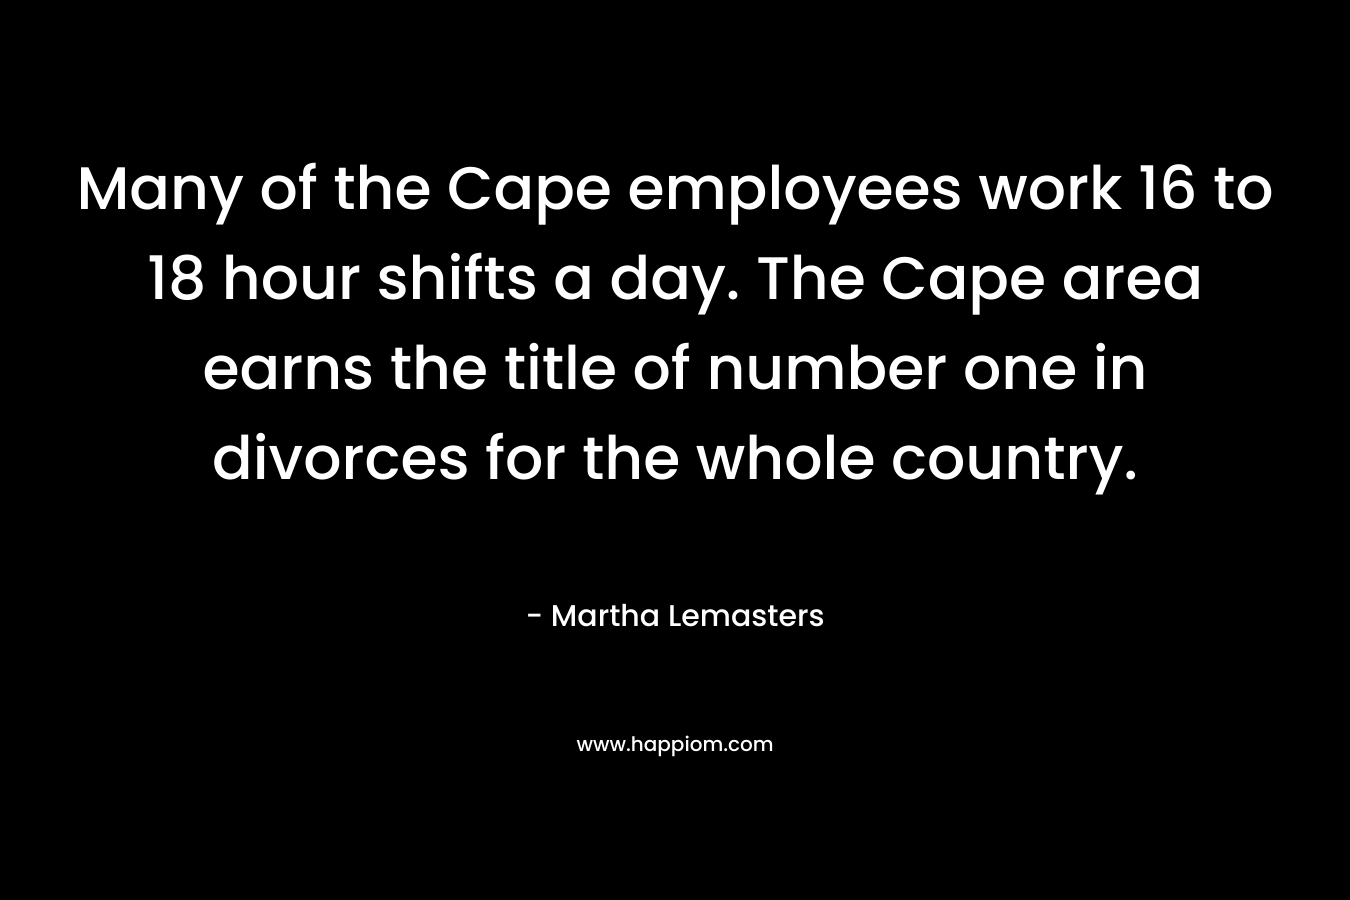 Many of the Cape employees work 16 to 18 hour shifts a day. The Cape area earns the title of number one in divorces for the whole country.